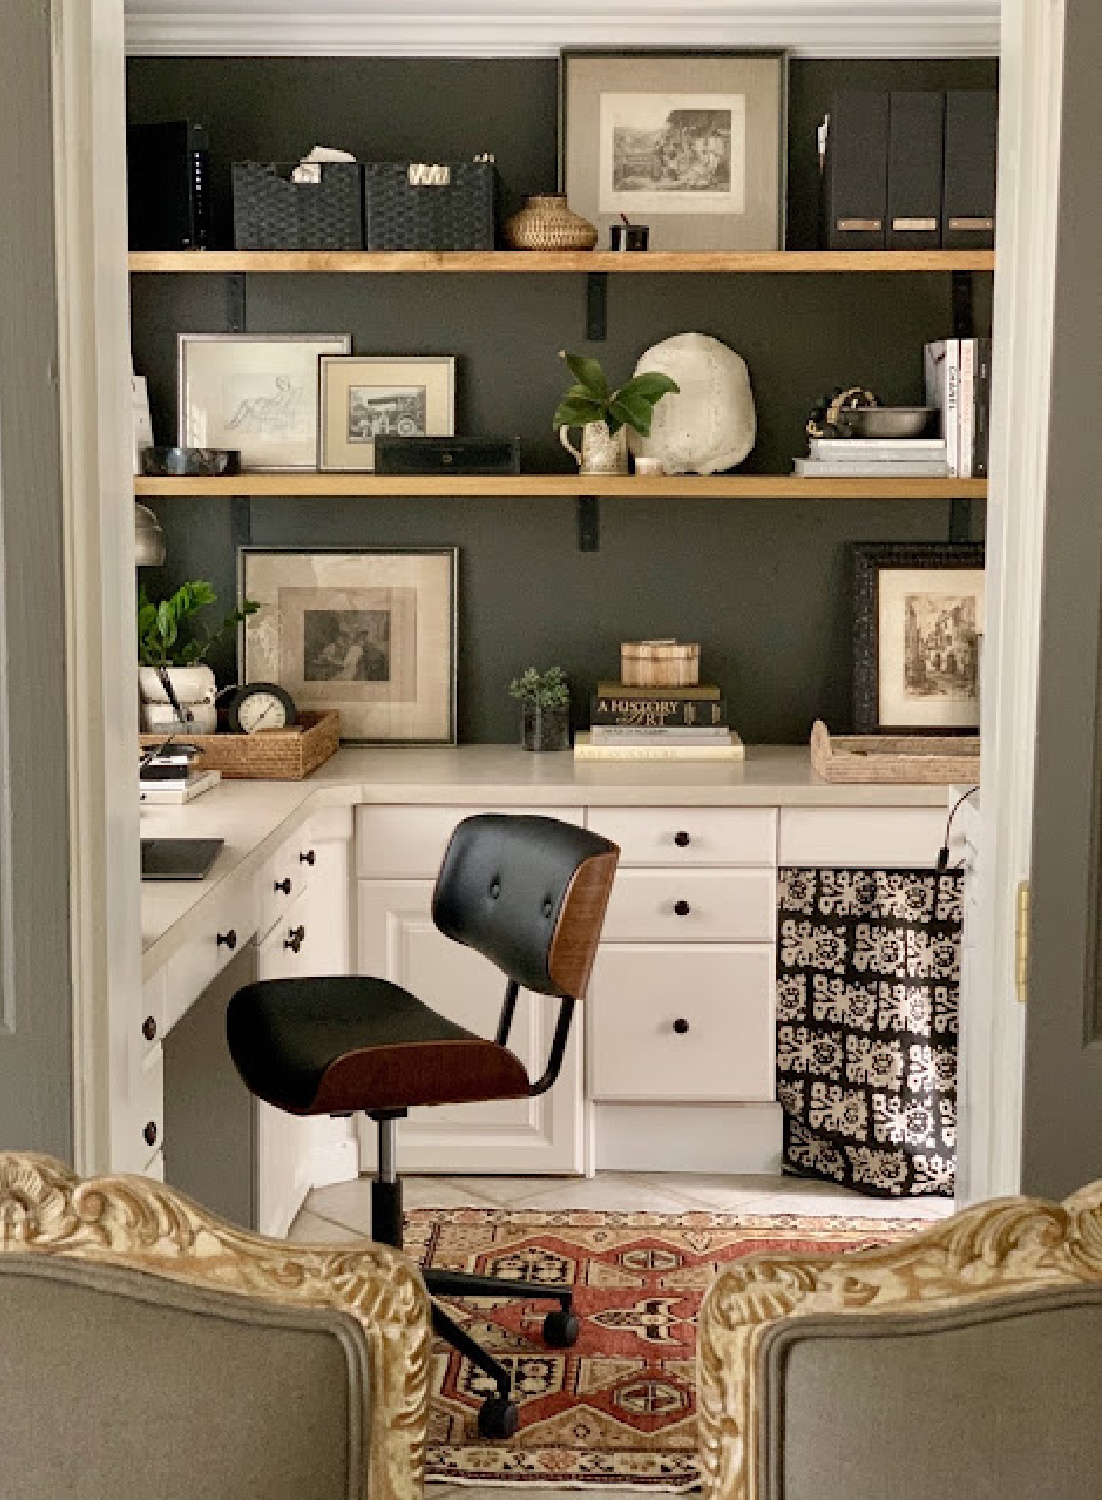 Beautiful home office with open shelves and neutral decor - Sherry Hart Interiors. Paint color is BM Iron Mountain. #paintcolors #ironmountain #homeoffices